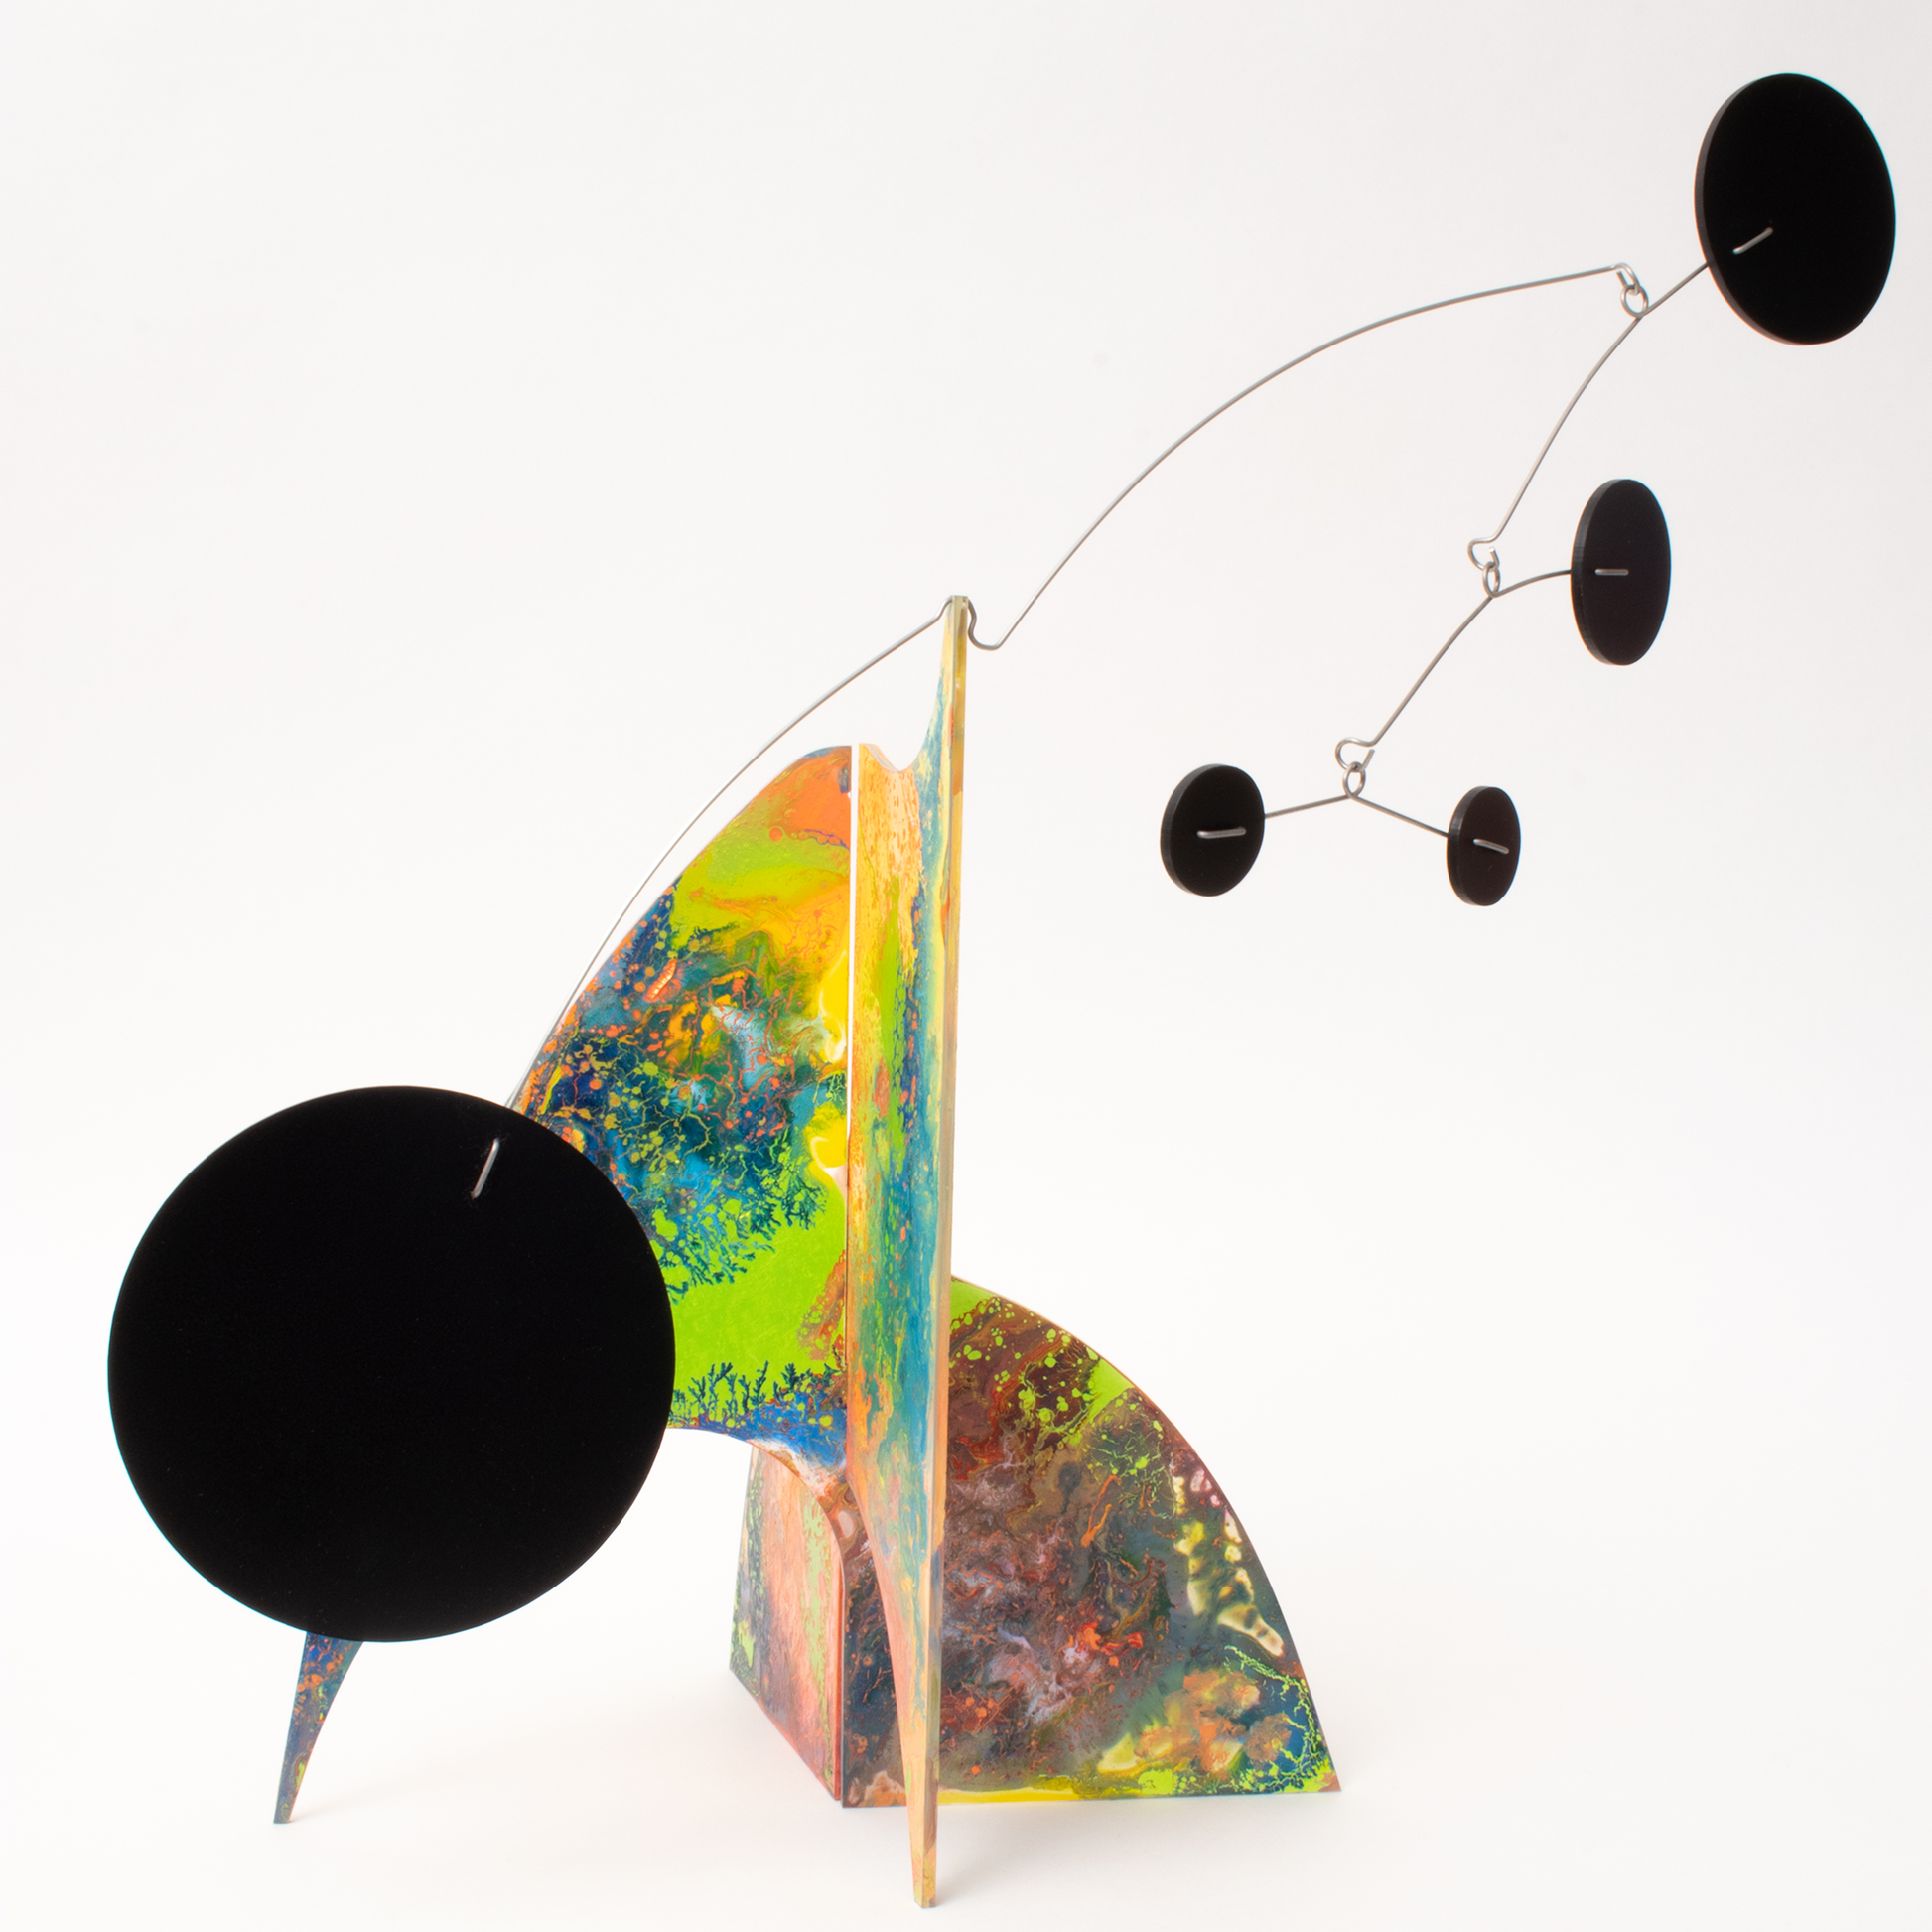 Overview of colorful abstract kinetic art stabile - hand painted one of a kind - modern sculpture by AtomicMobiles.com